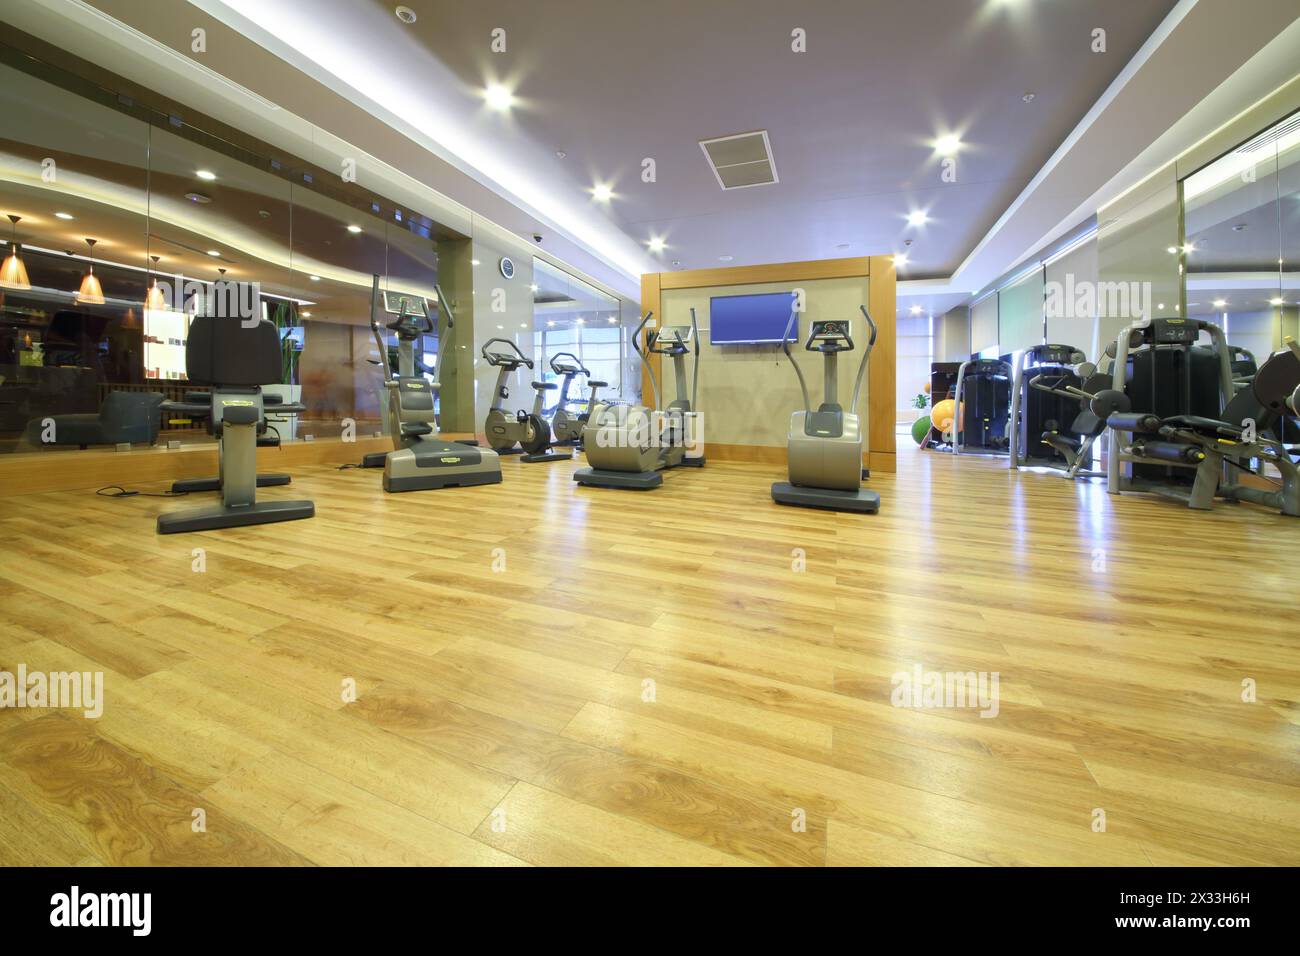 SOCHI, RUSSIA - JUL 27, 2014: Fitness equipment in the gym in the Hotel Radisson Blu Paradise Resort and Spa Stock Photo